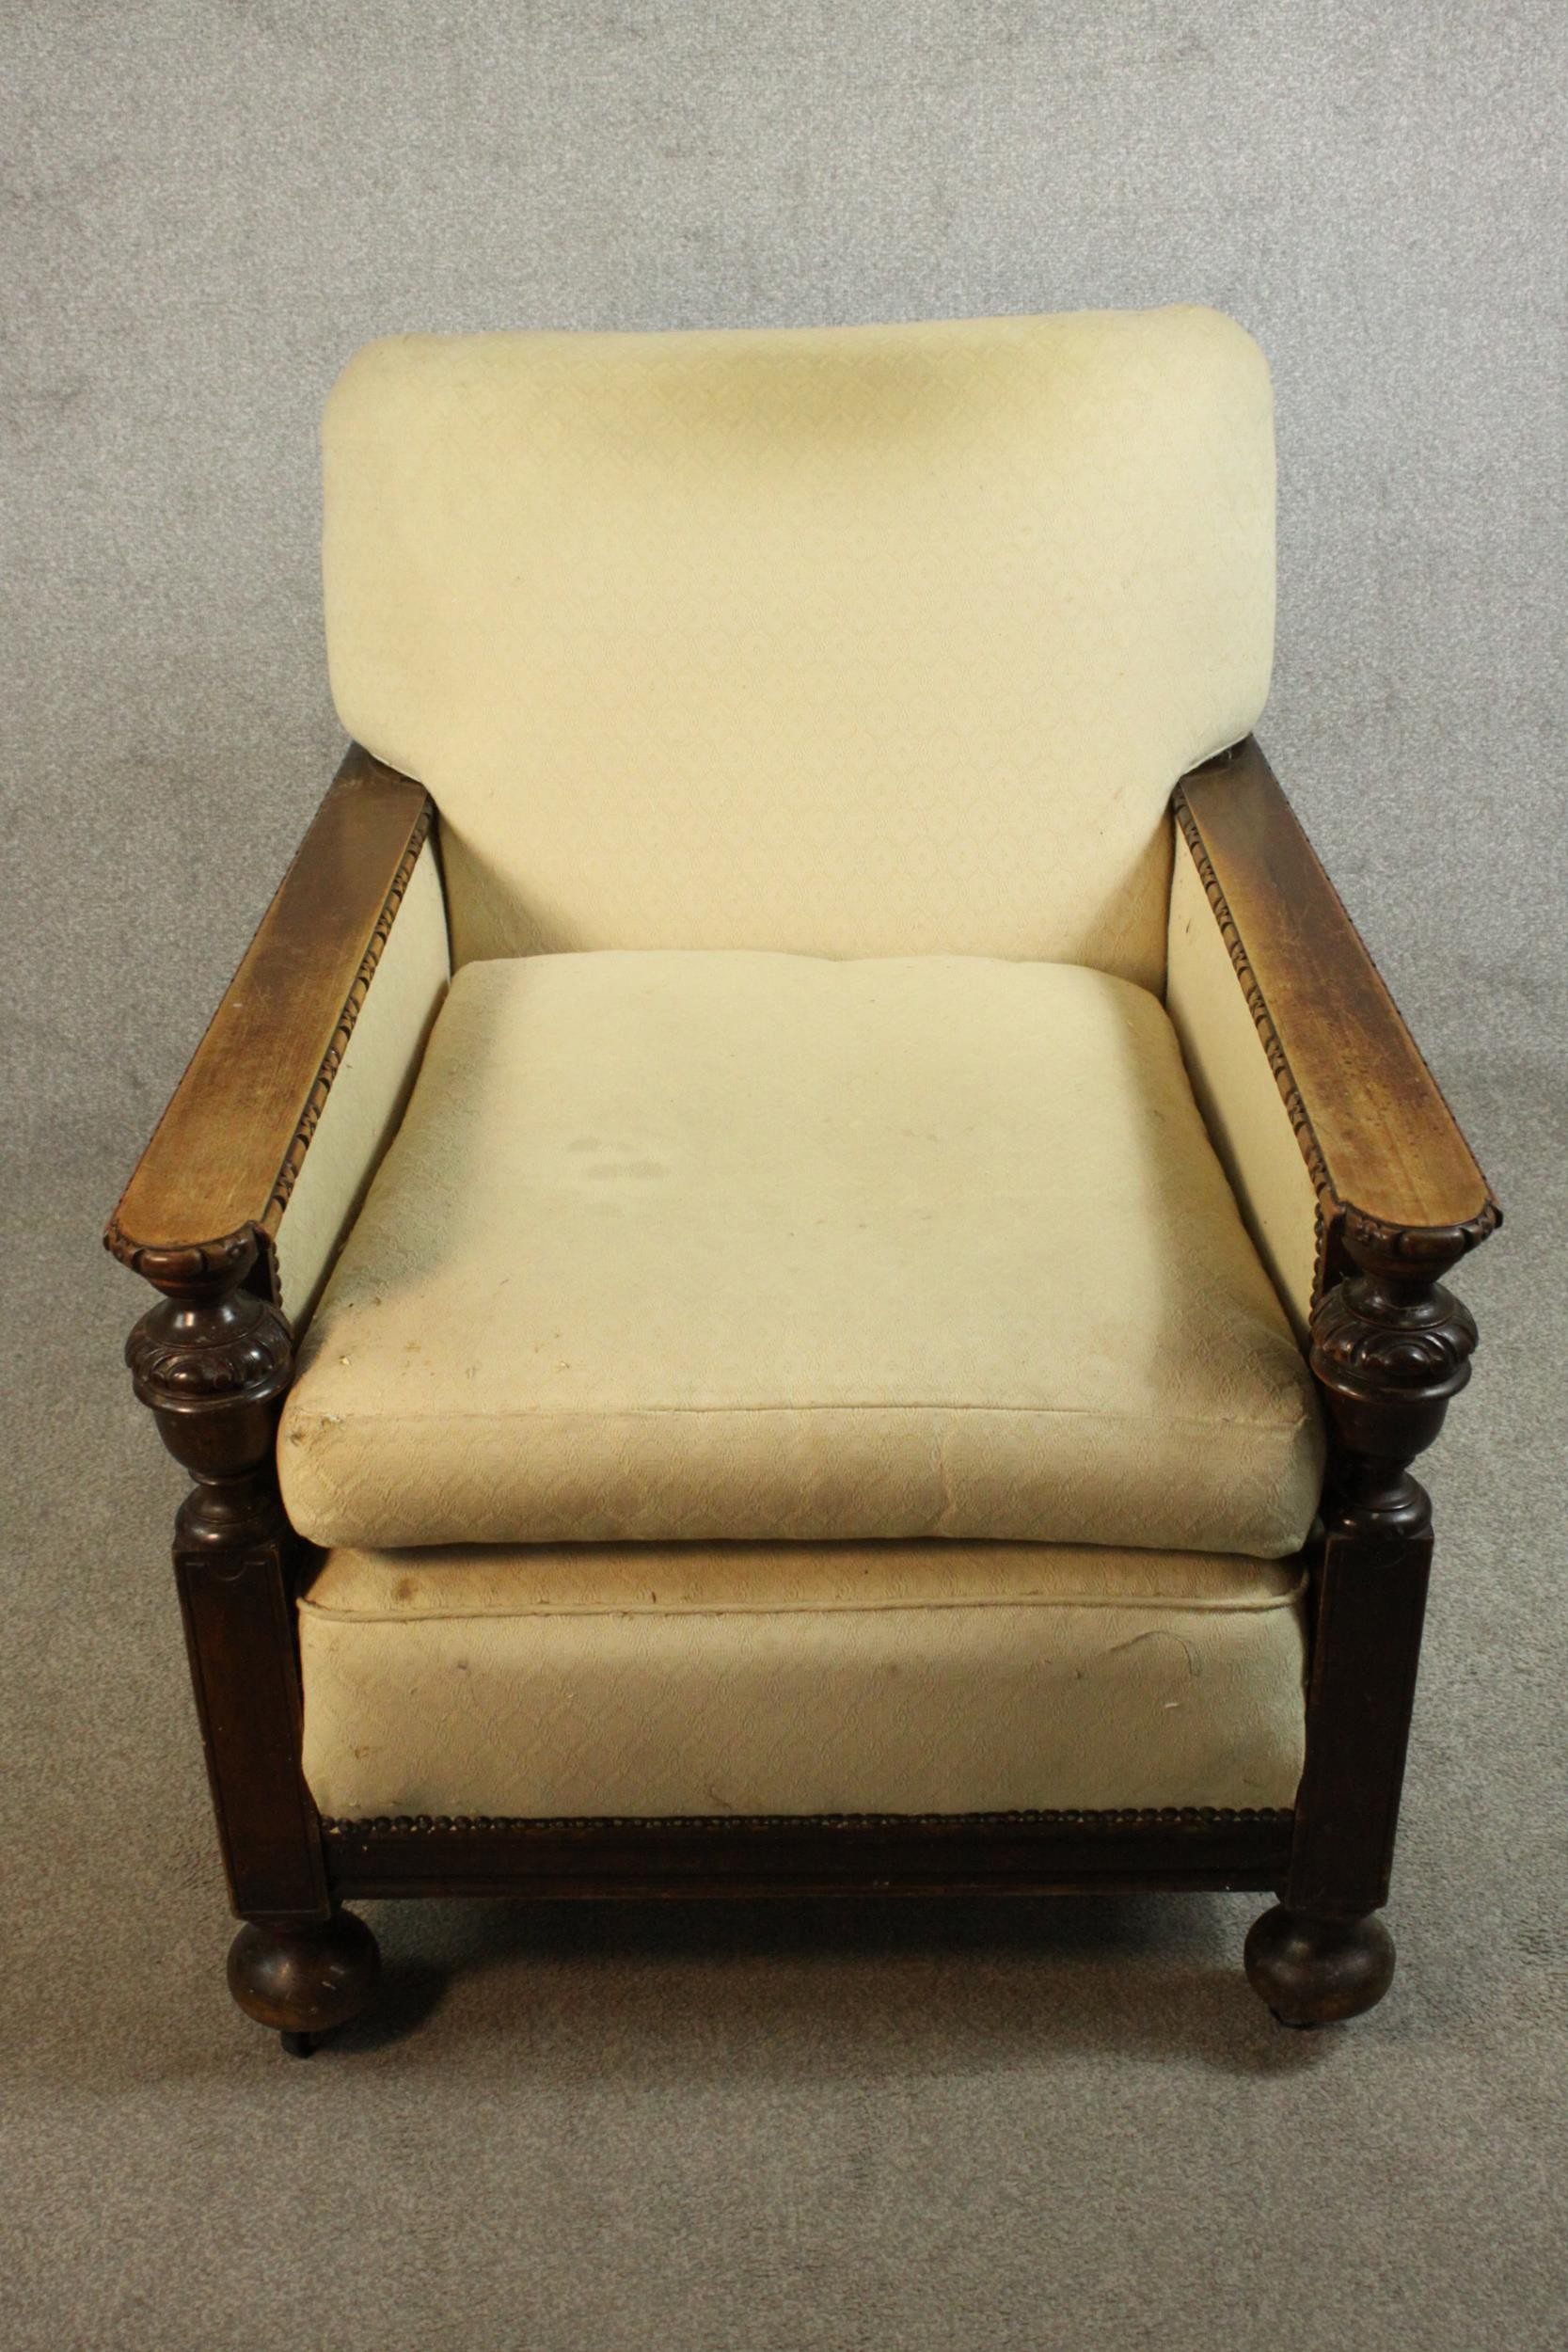 A pair of early 20th century oak armchairs, upholstered in cream fabric, with carved cup and cover - Image 4 of 10